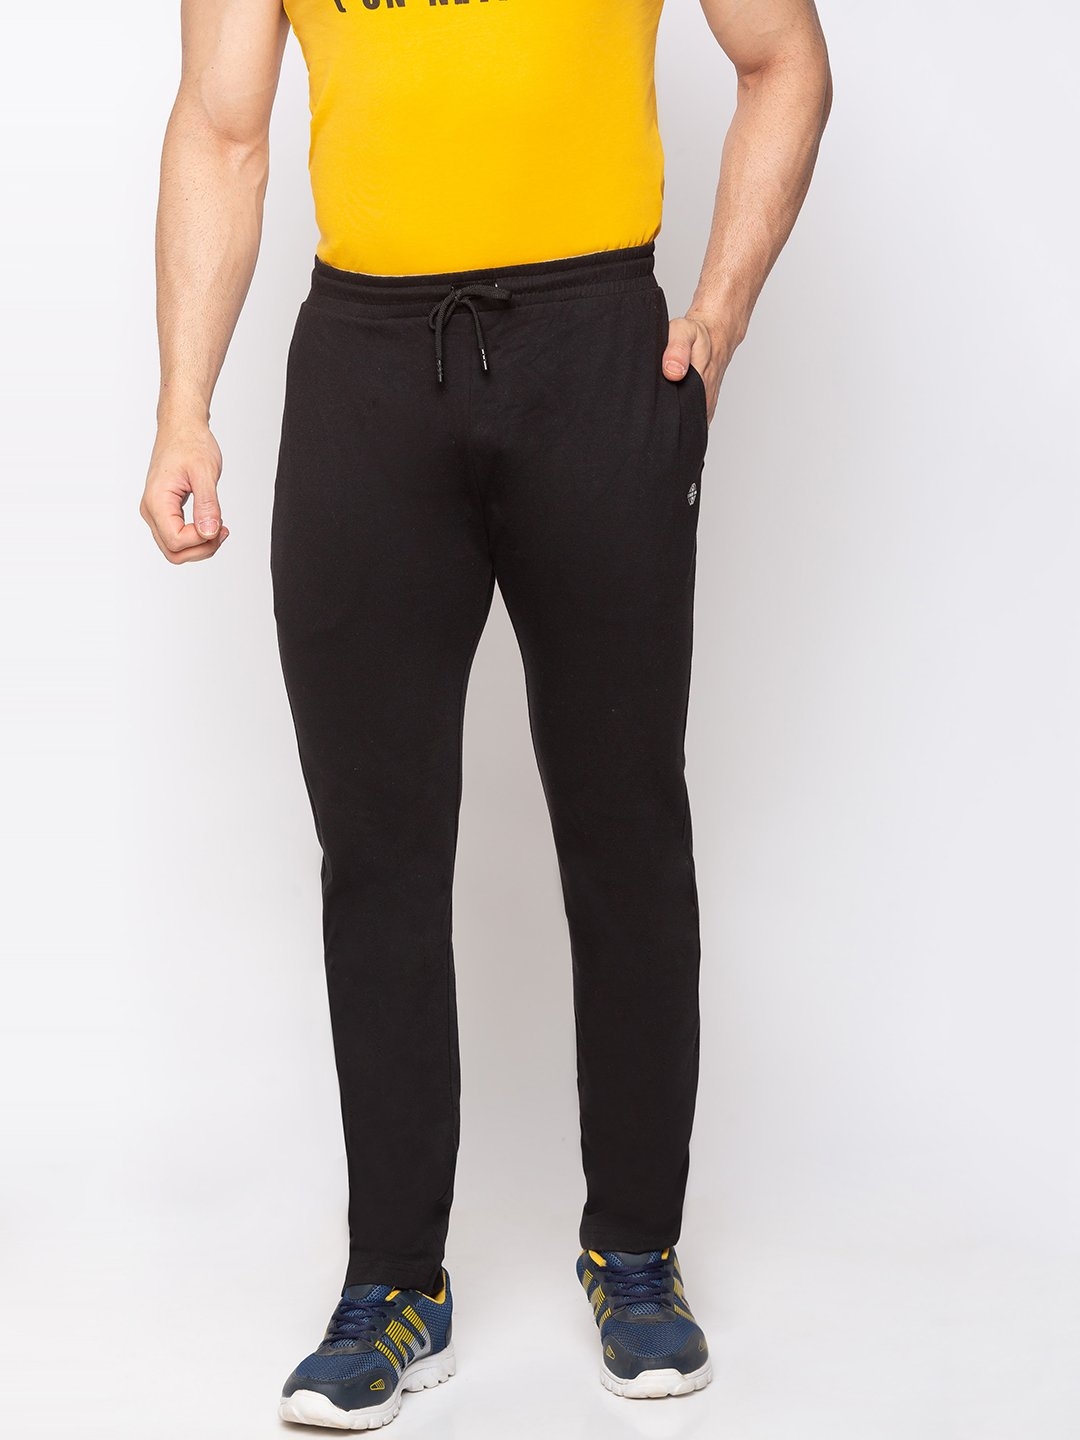 Status Quo | Black Solid Track Pants with HD Print